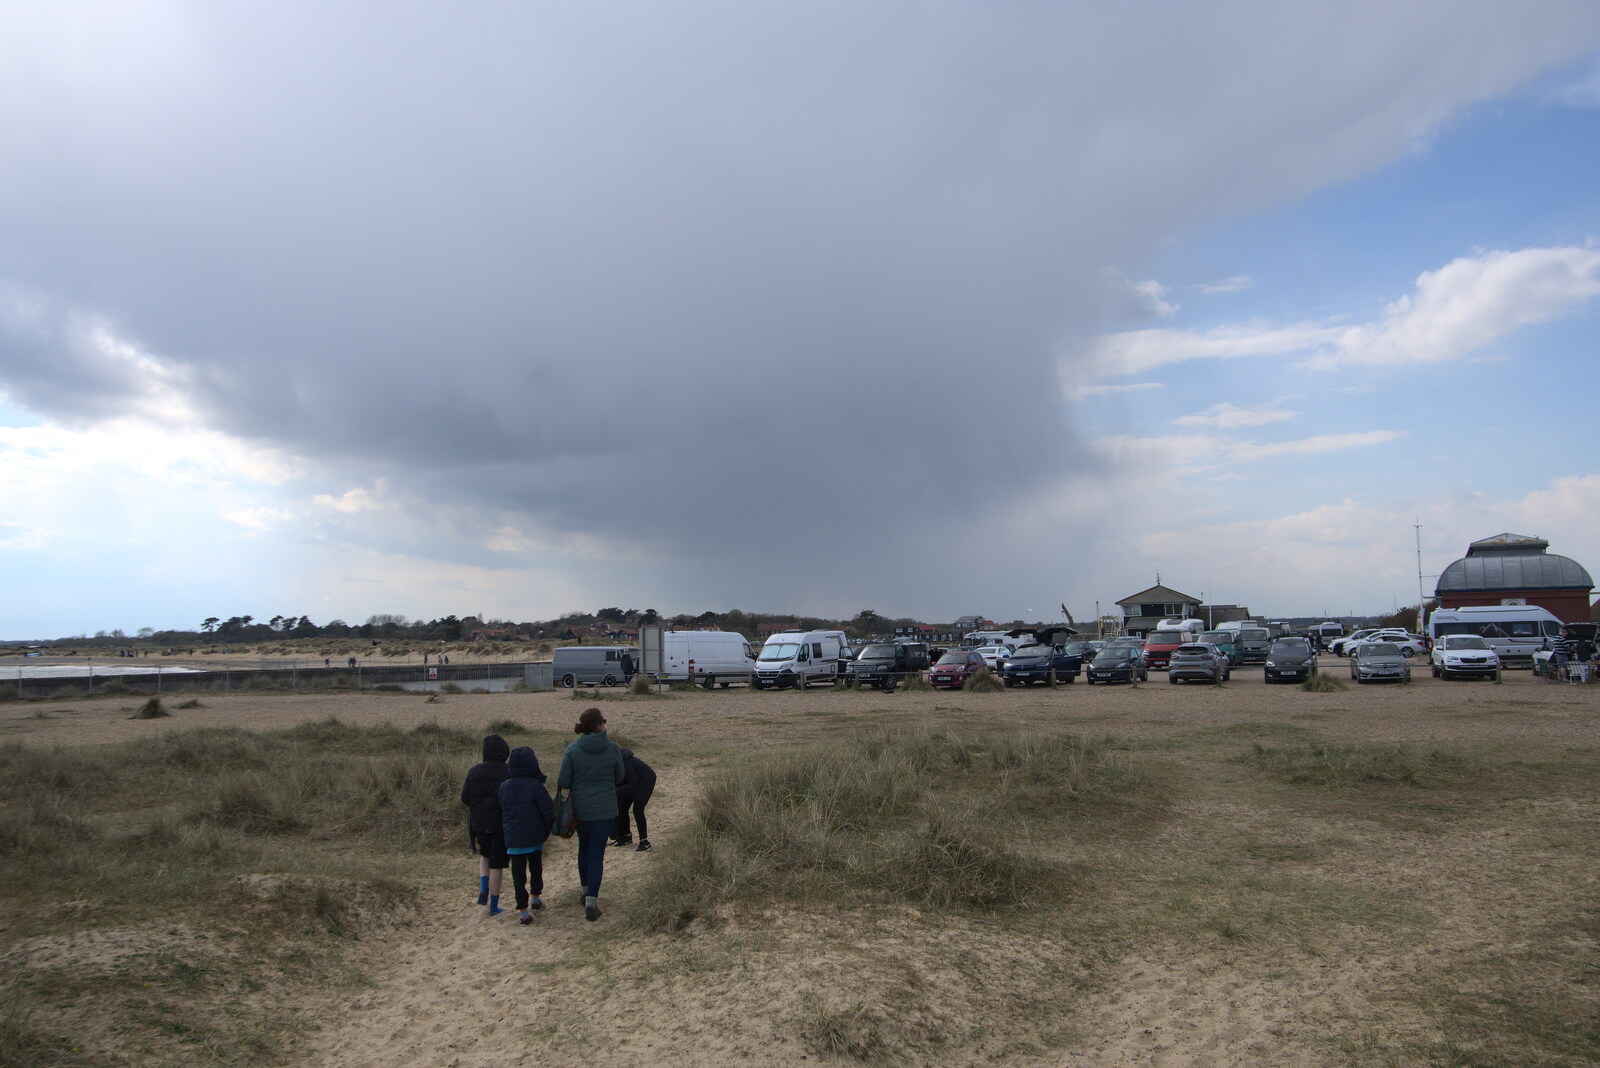 Rainclouds gather on the horizon from A Chilly Trip to the Beach, Southwold Harbour, Suffolk - 2nd May 2021